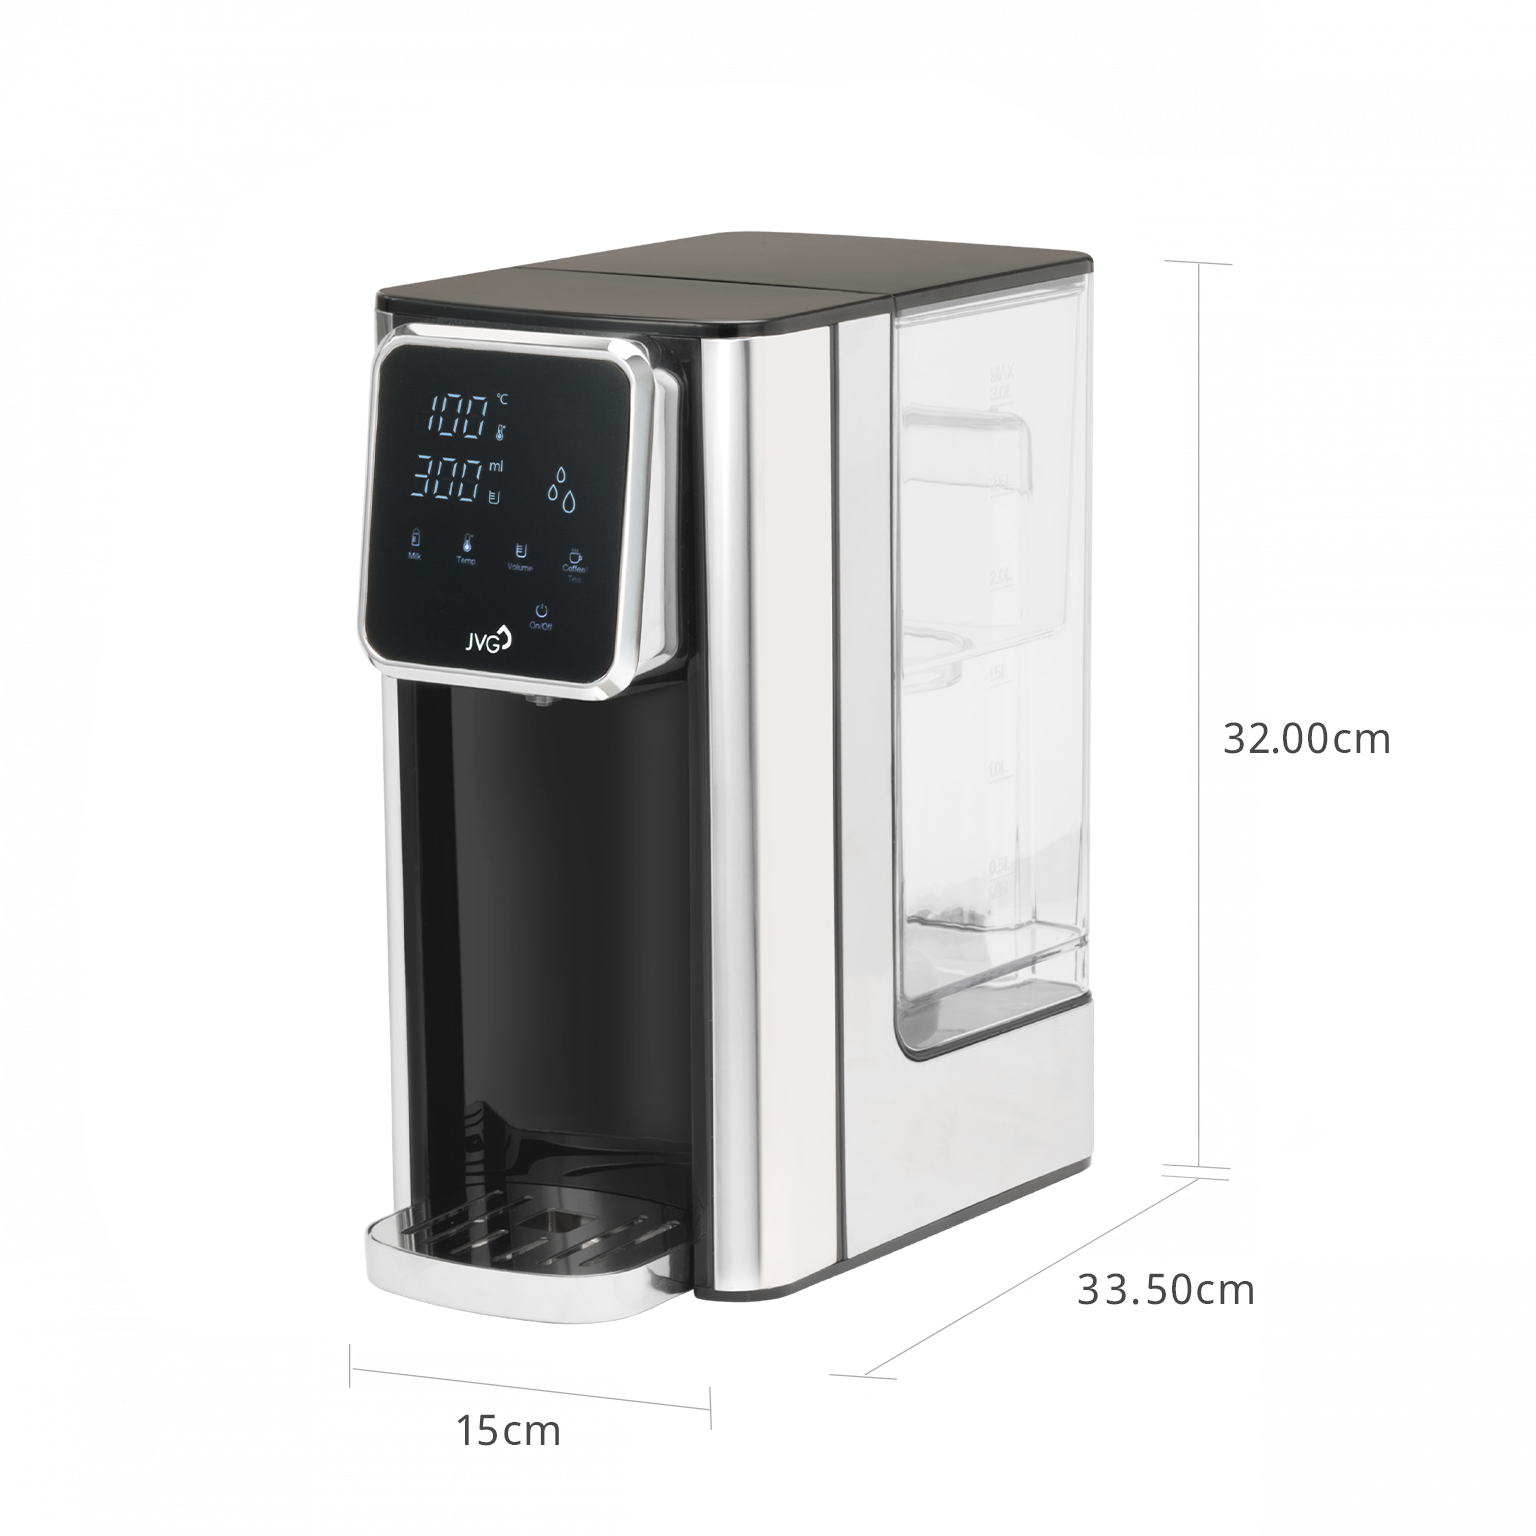 Build-in Filtering Instant Hot Water Dispenser dimensions